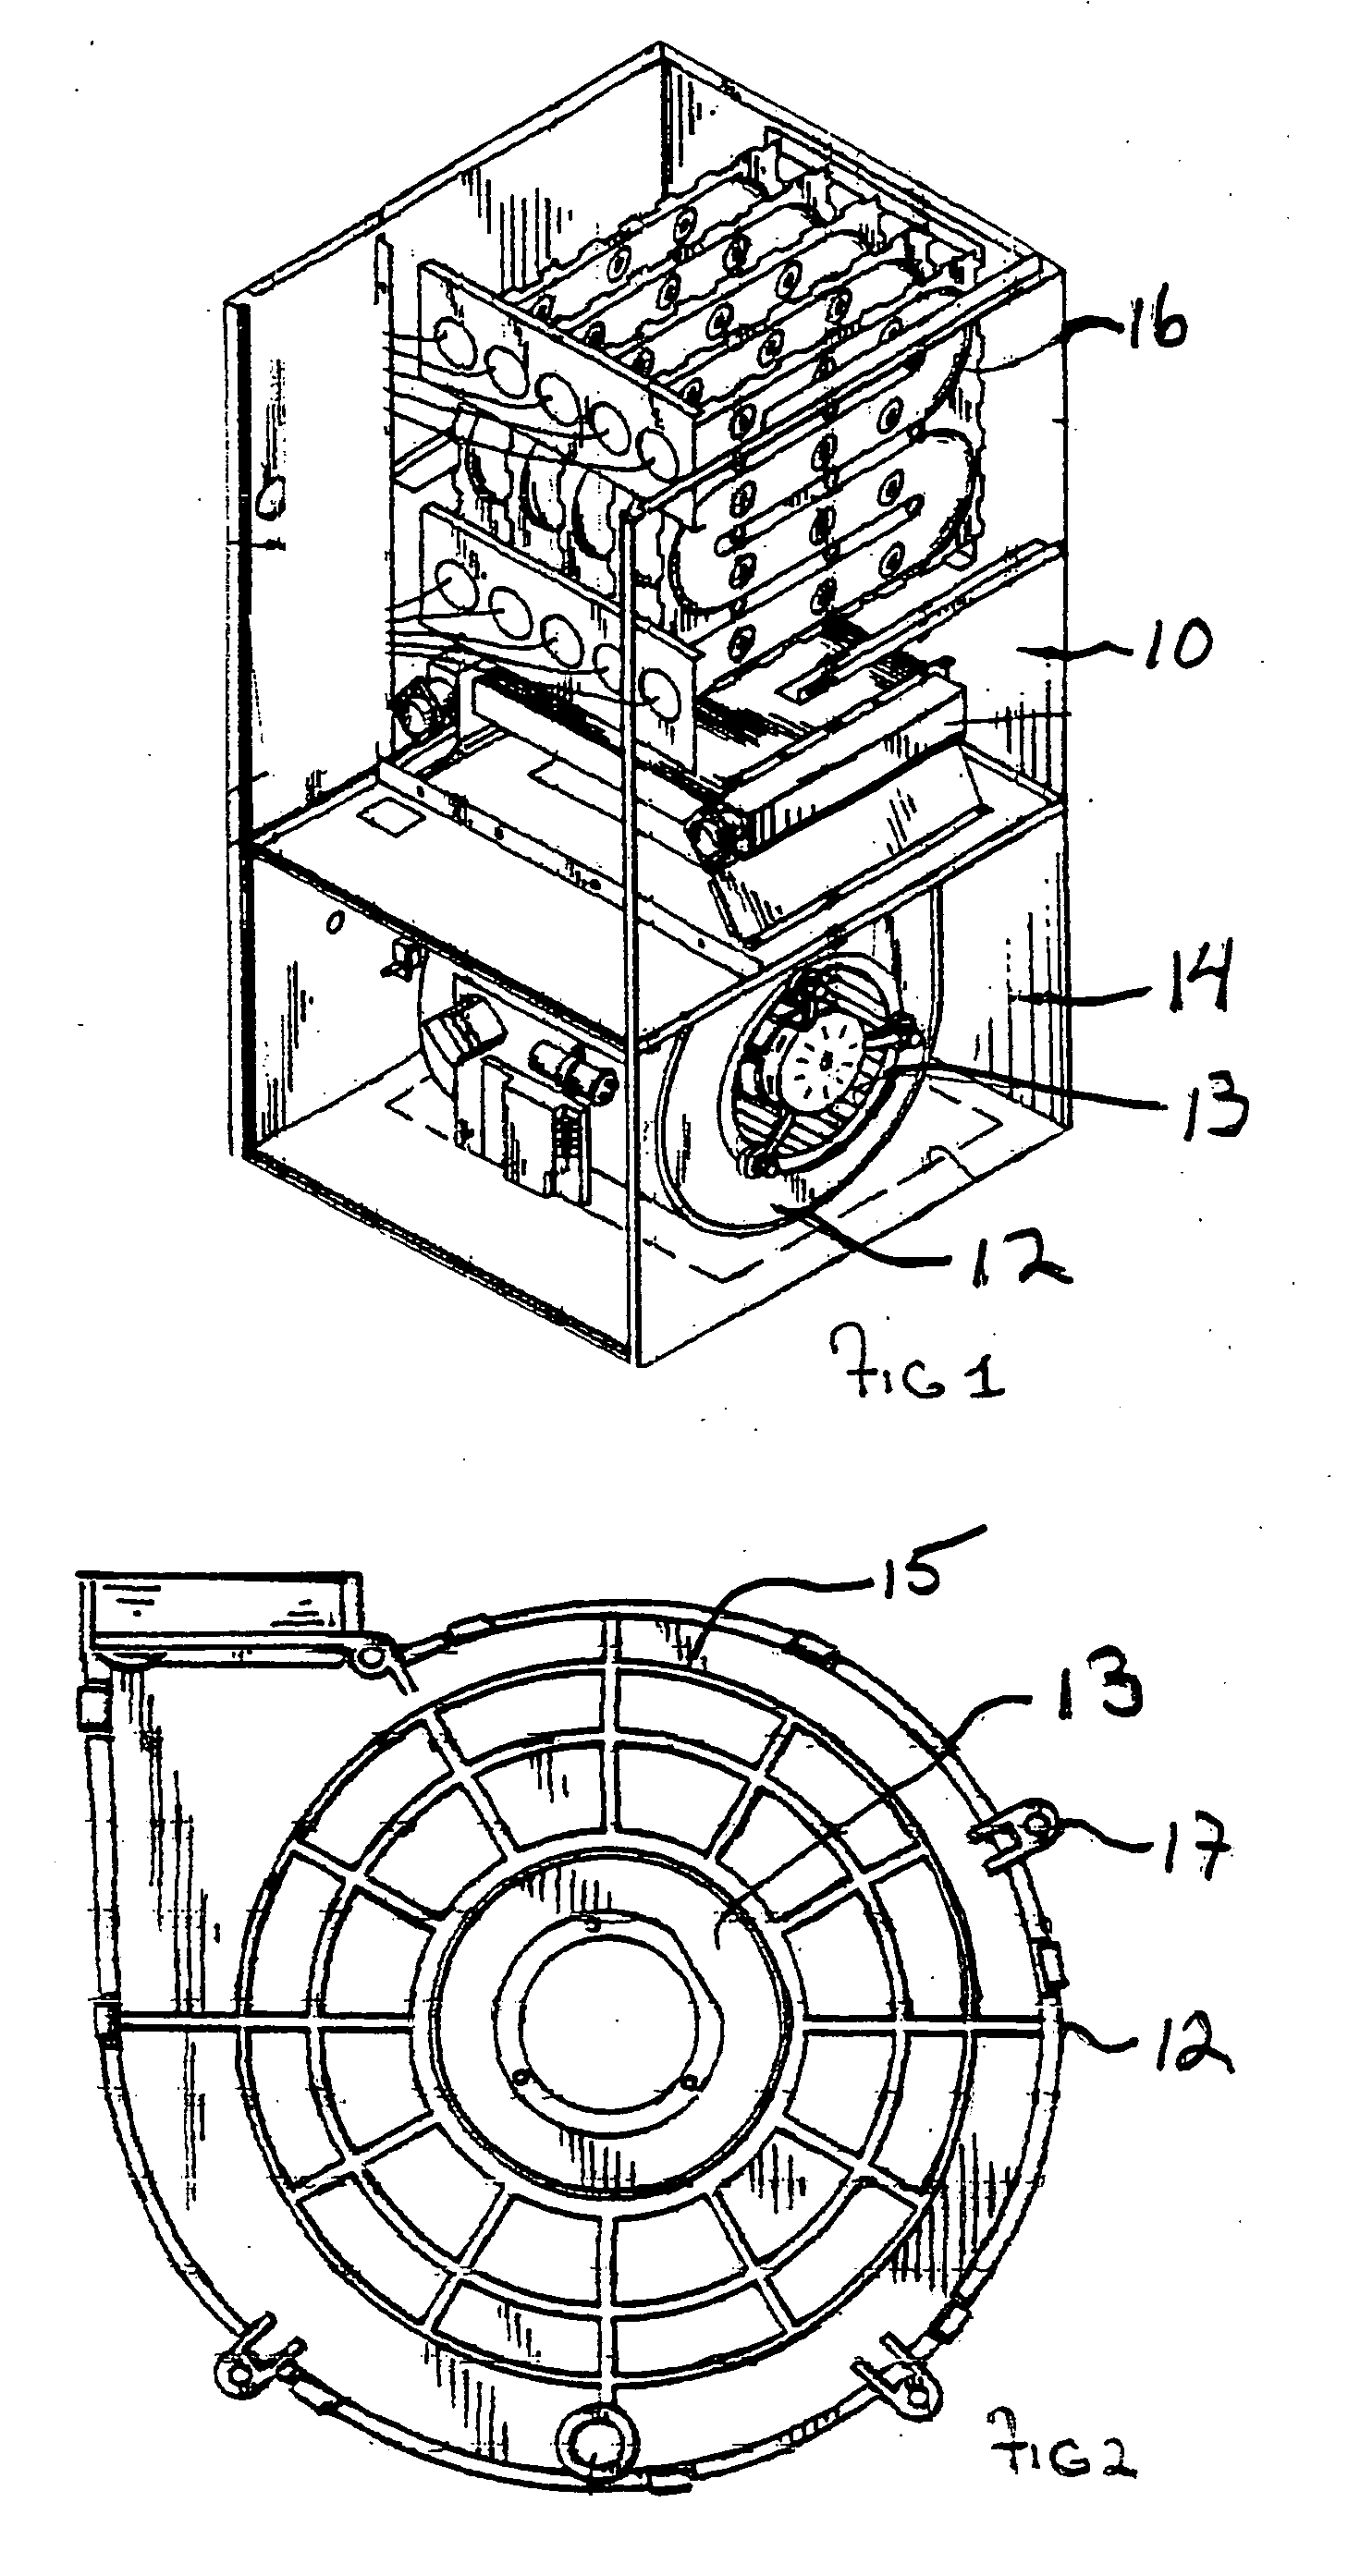 Molding compounds for use in furnace blower housings and blower housings molded from these compounds